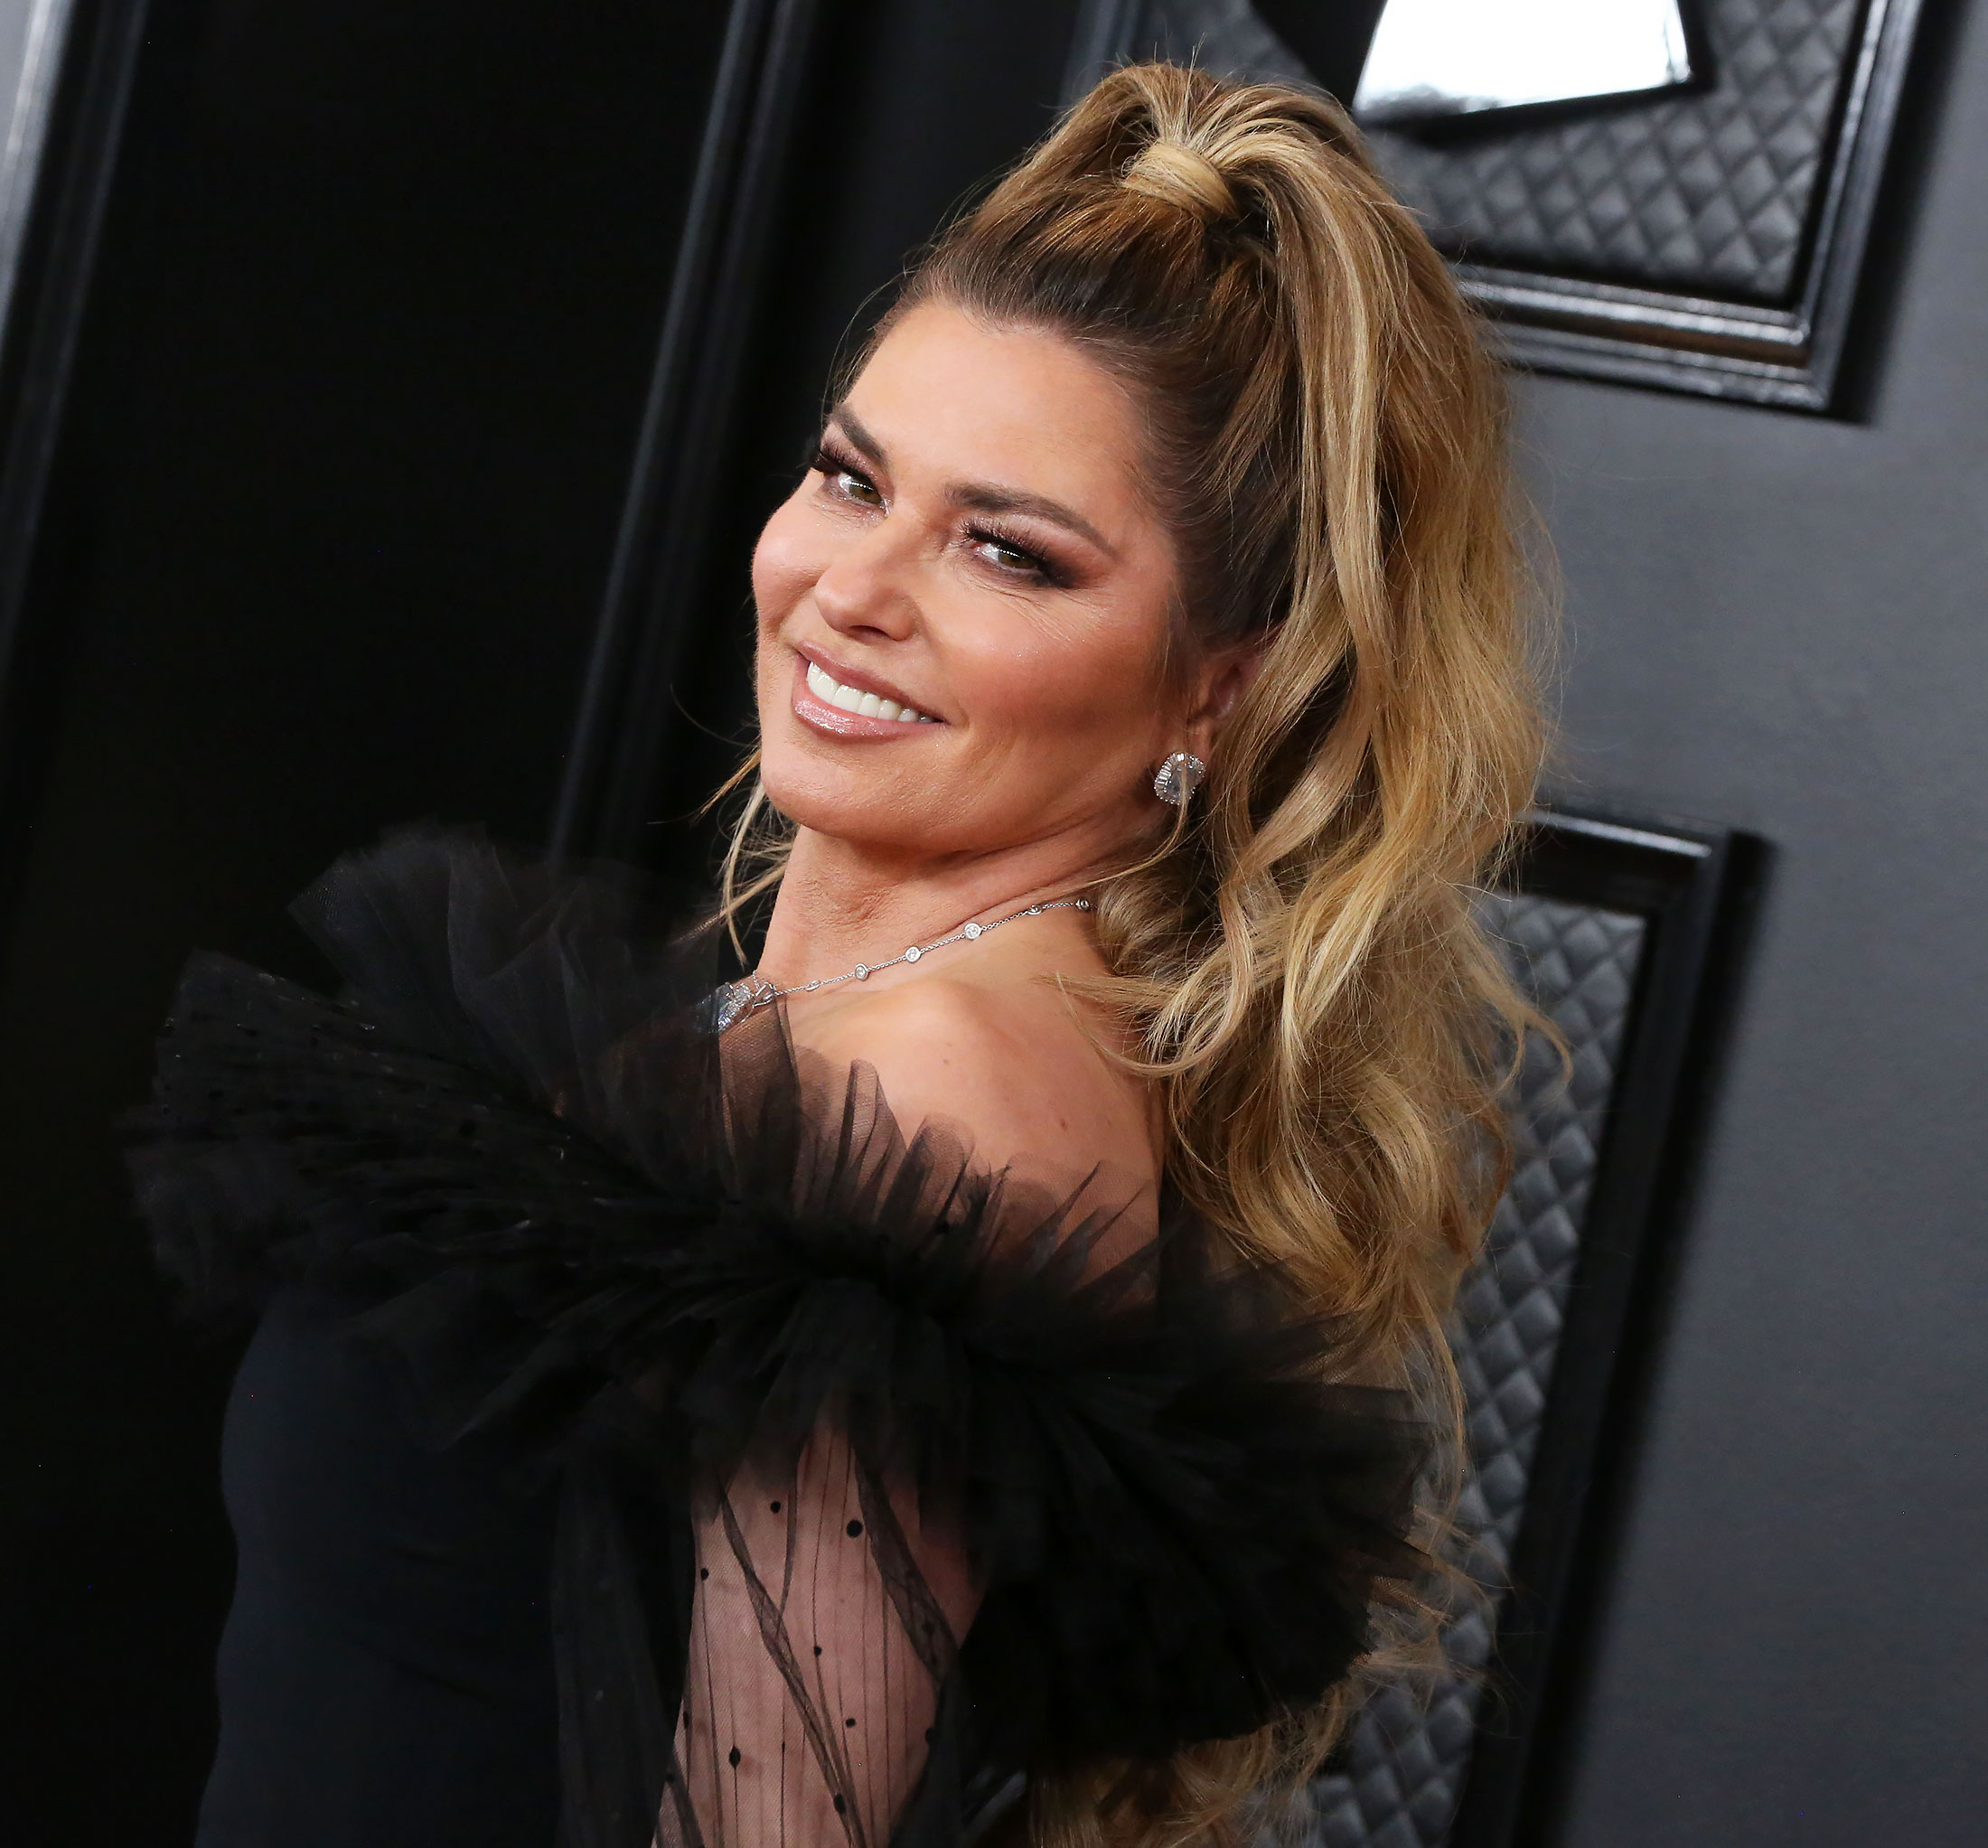 Shania Twain Explains Brad Pitt Reference in 'That Don't Impress Me Much'